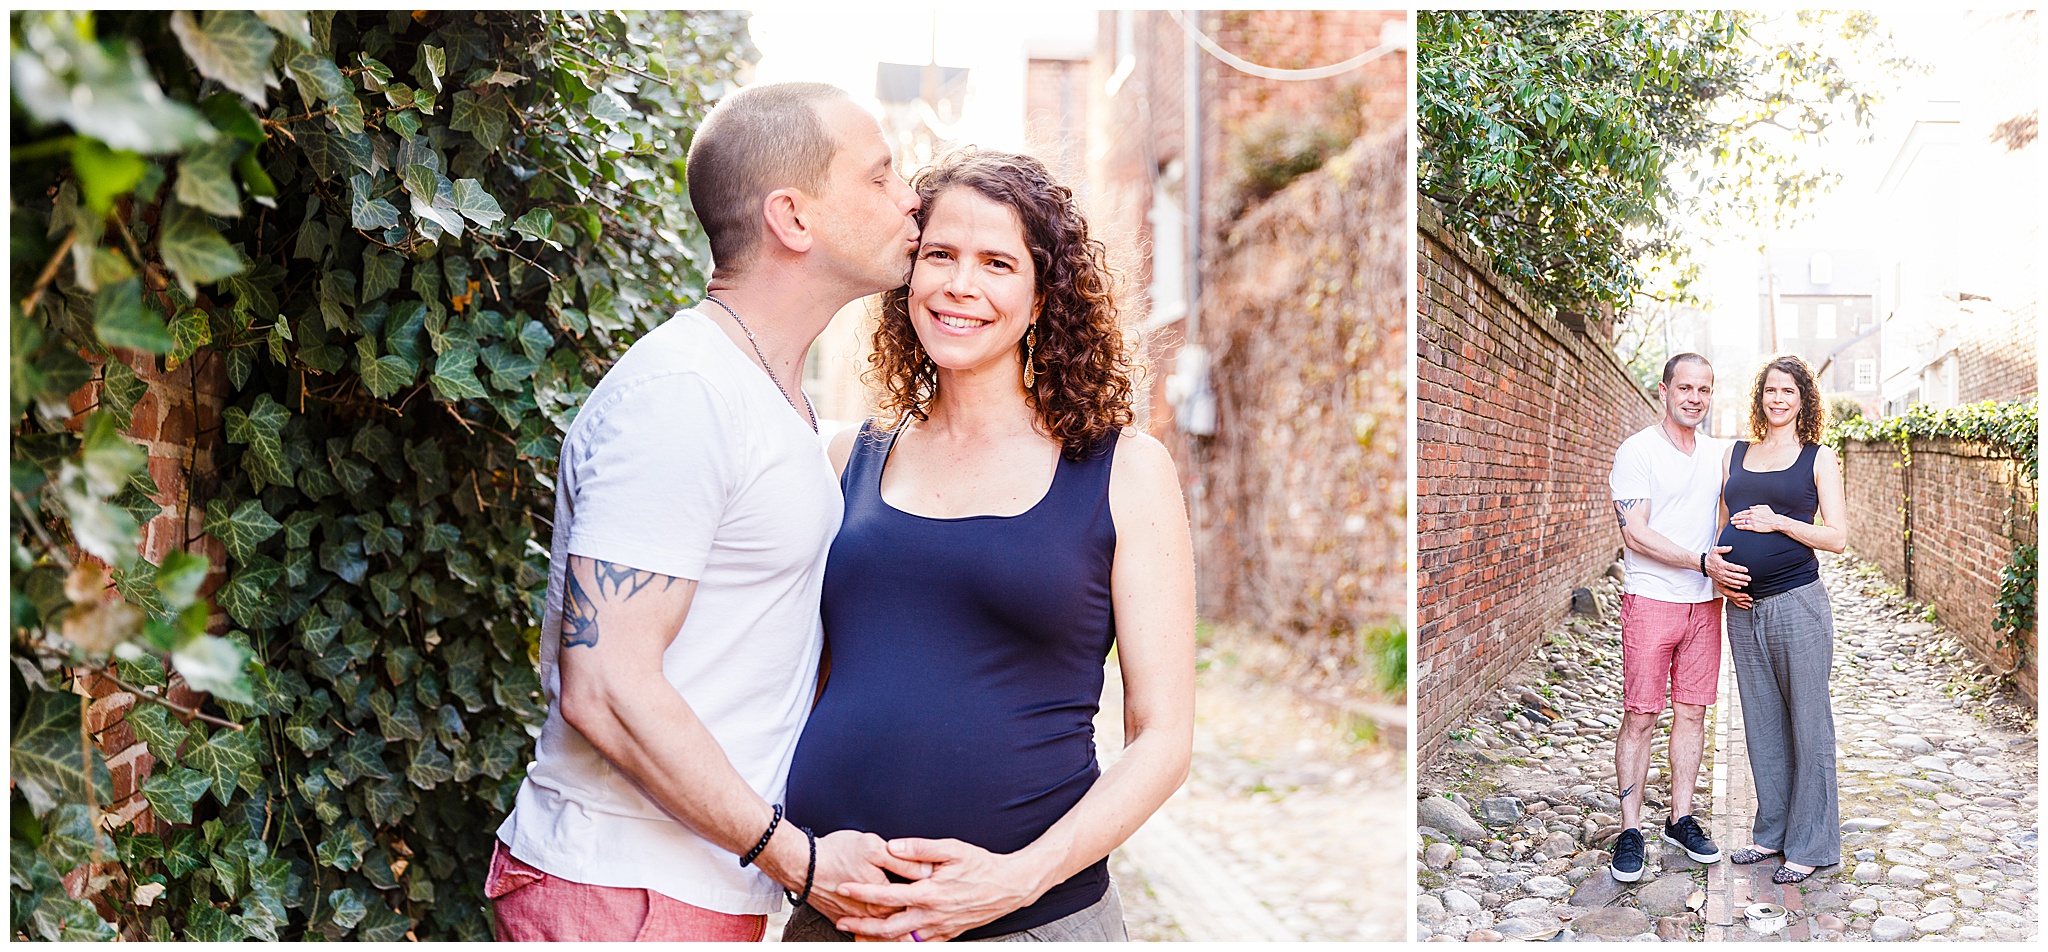 Maternity Photo Shoot In Old Town Alexandria Virgina with Kofmehl Photography